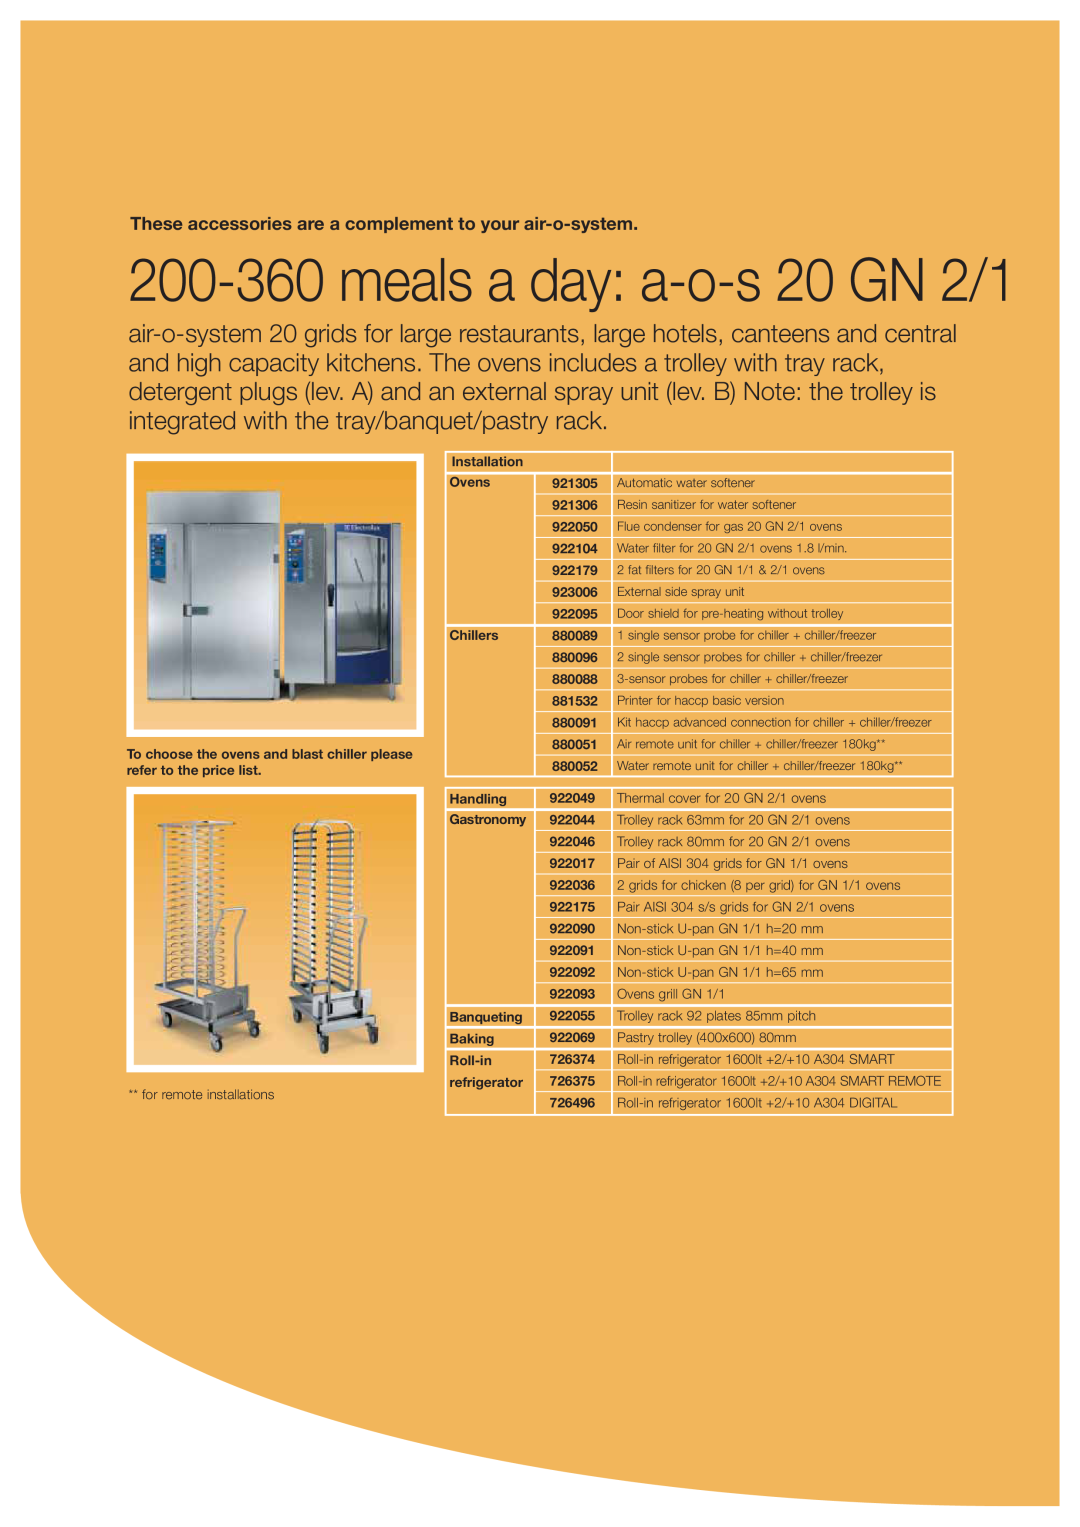 Electrolux 922028, 726496, 691231 manual meals a day a-o-s 20 GN 2/1, These accessories are a complement to your air-o-system 